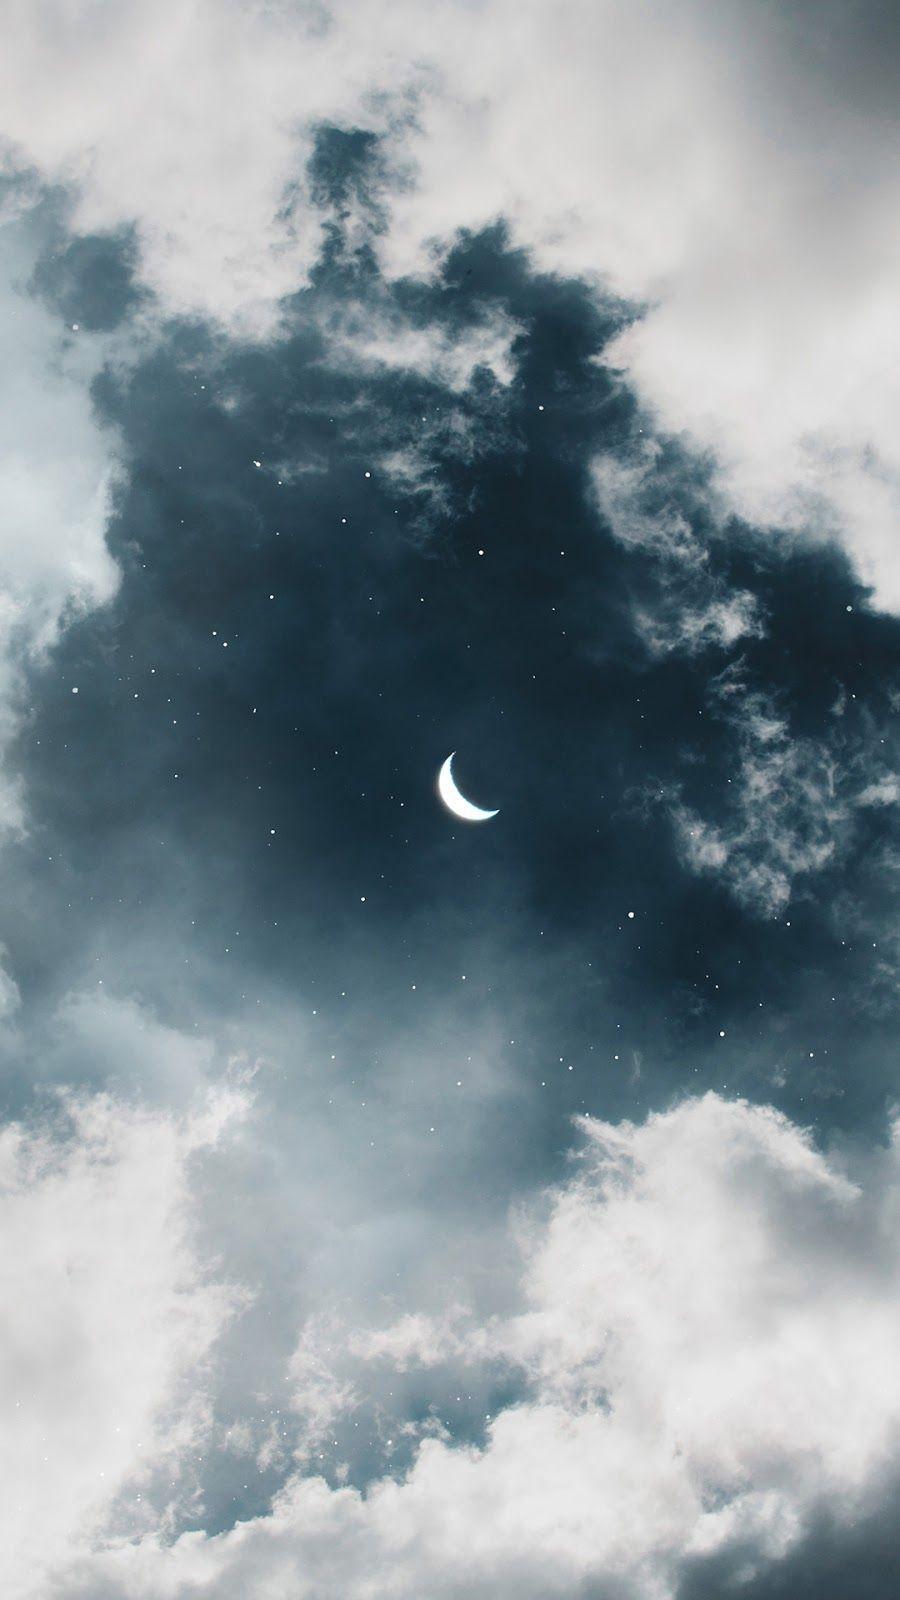 Sky and Moon Wallpapers - Top Free Sky and Moon Backgrounds ...